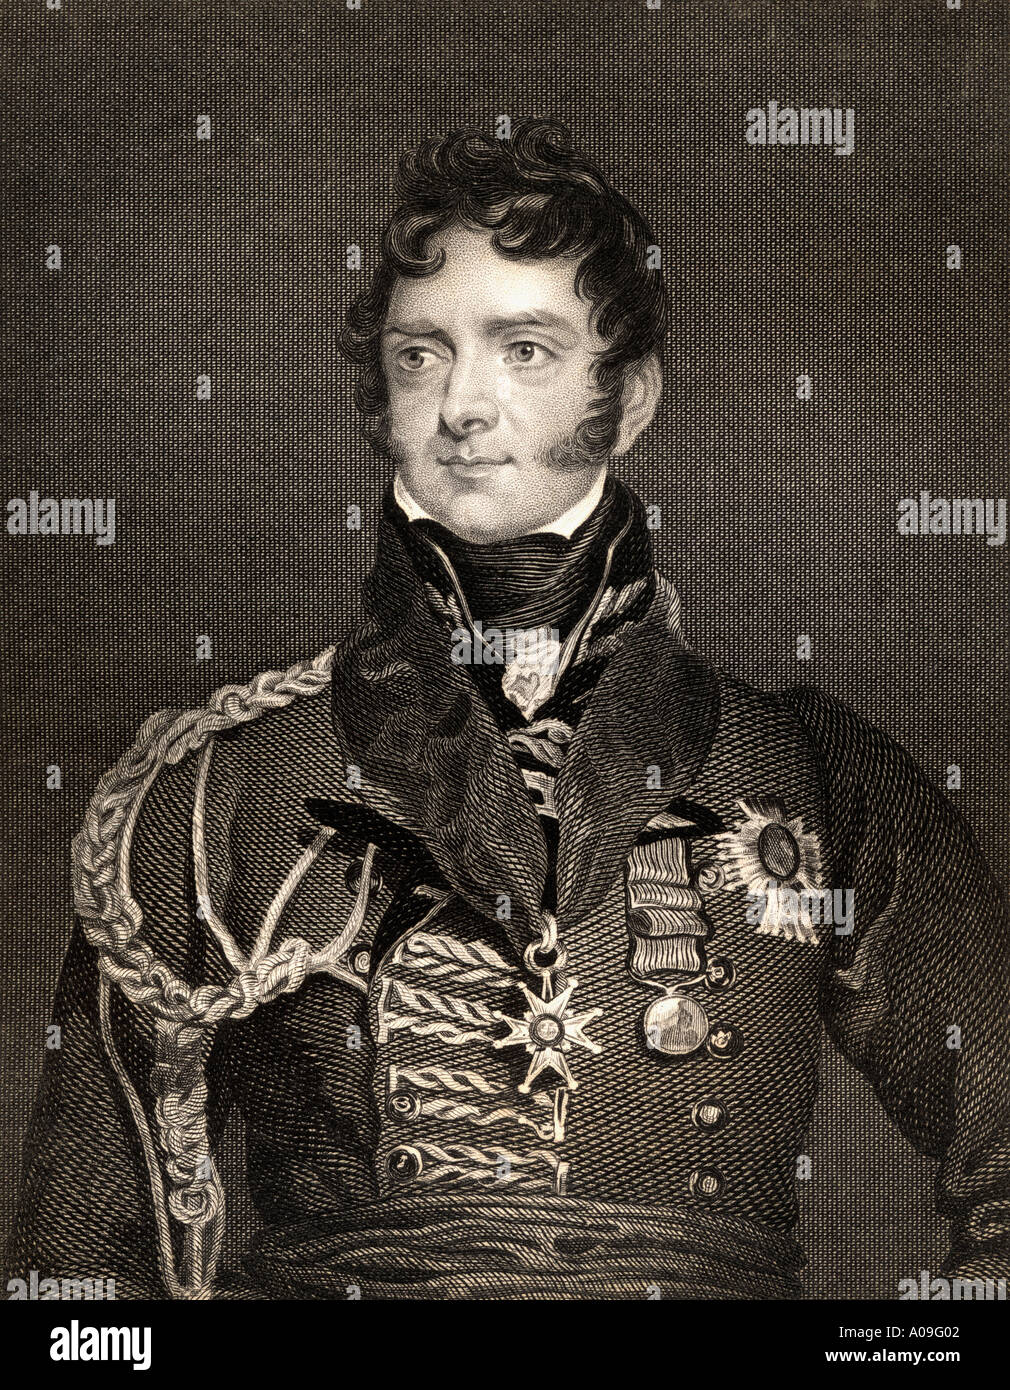 Major-General Sir Henry Torrens, 1779– 1828.  Adjutant-General to the Forces. Stock Photo